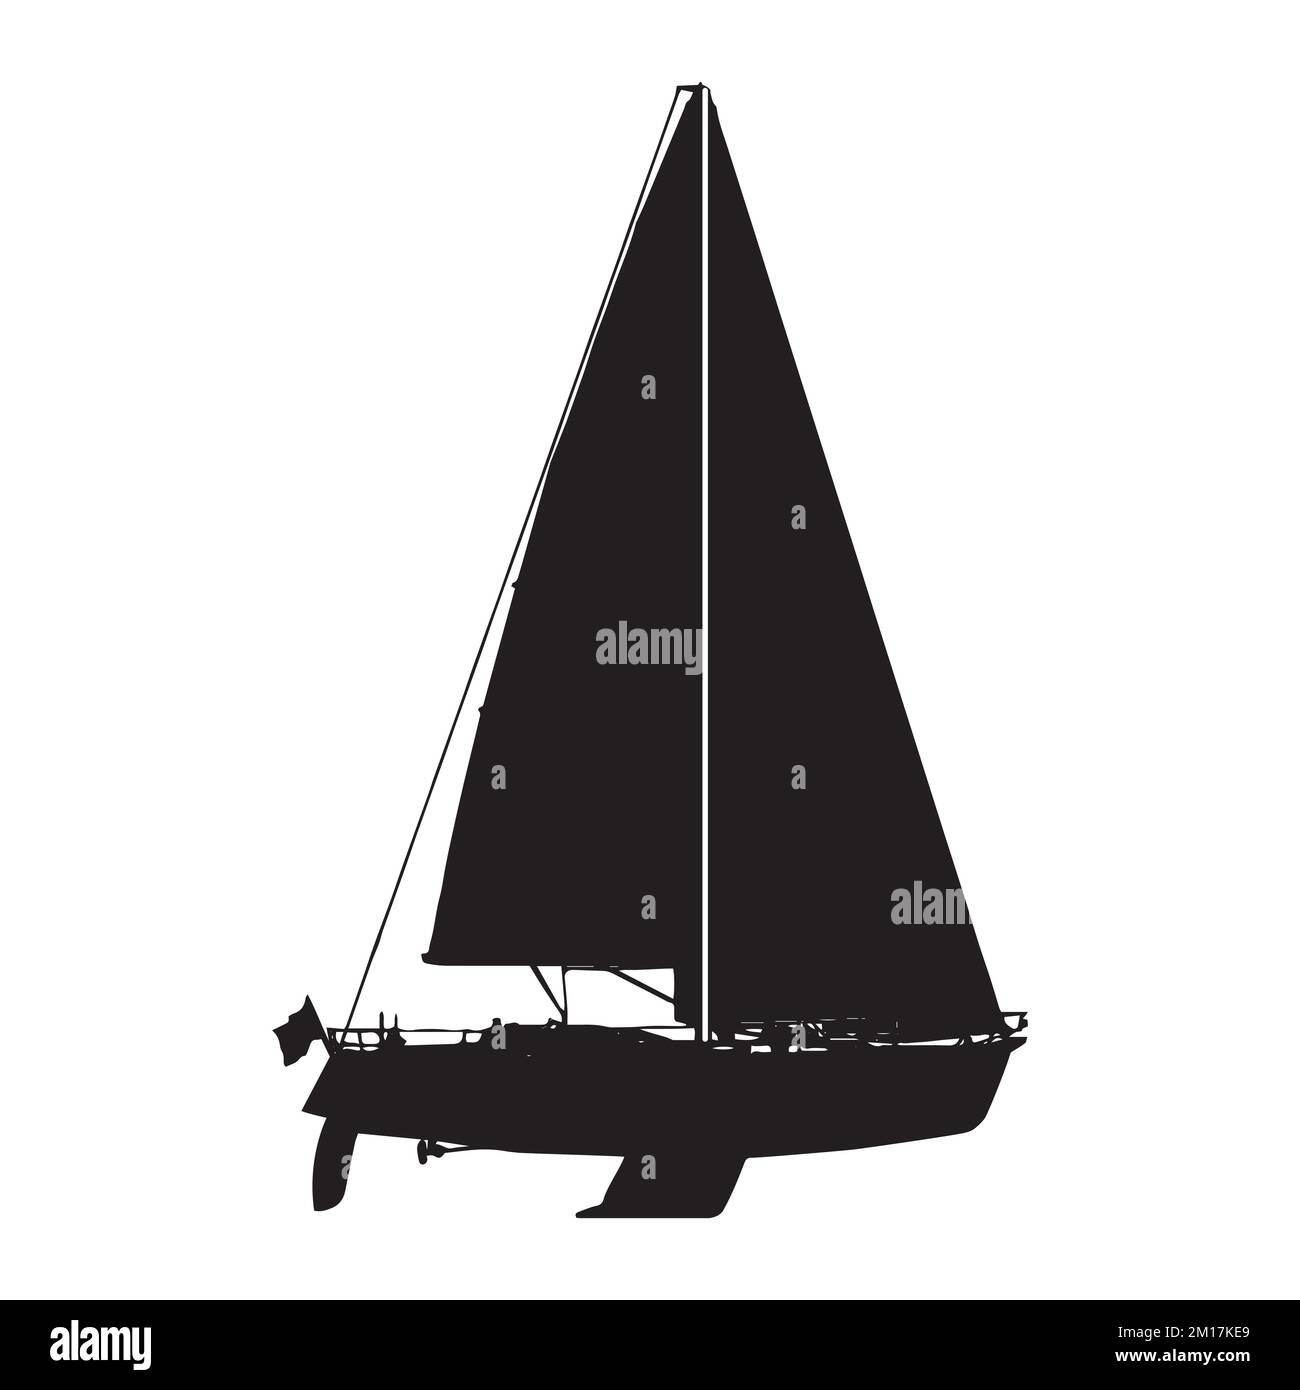 Vector Illustration of Sailing Boat Silhouette Stock Vector